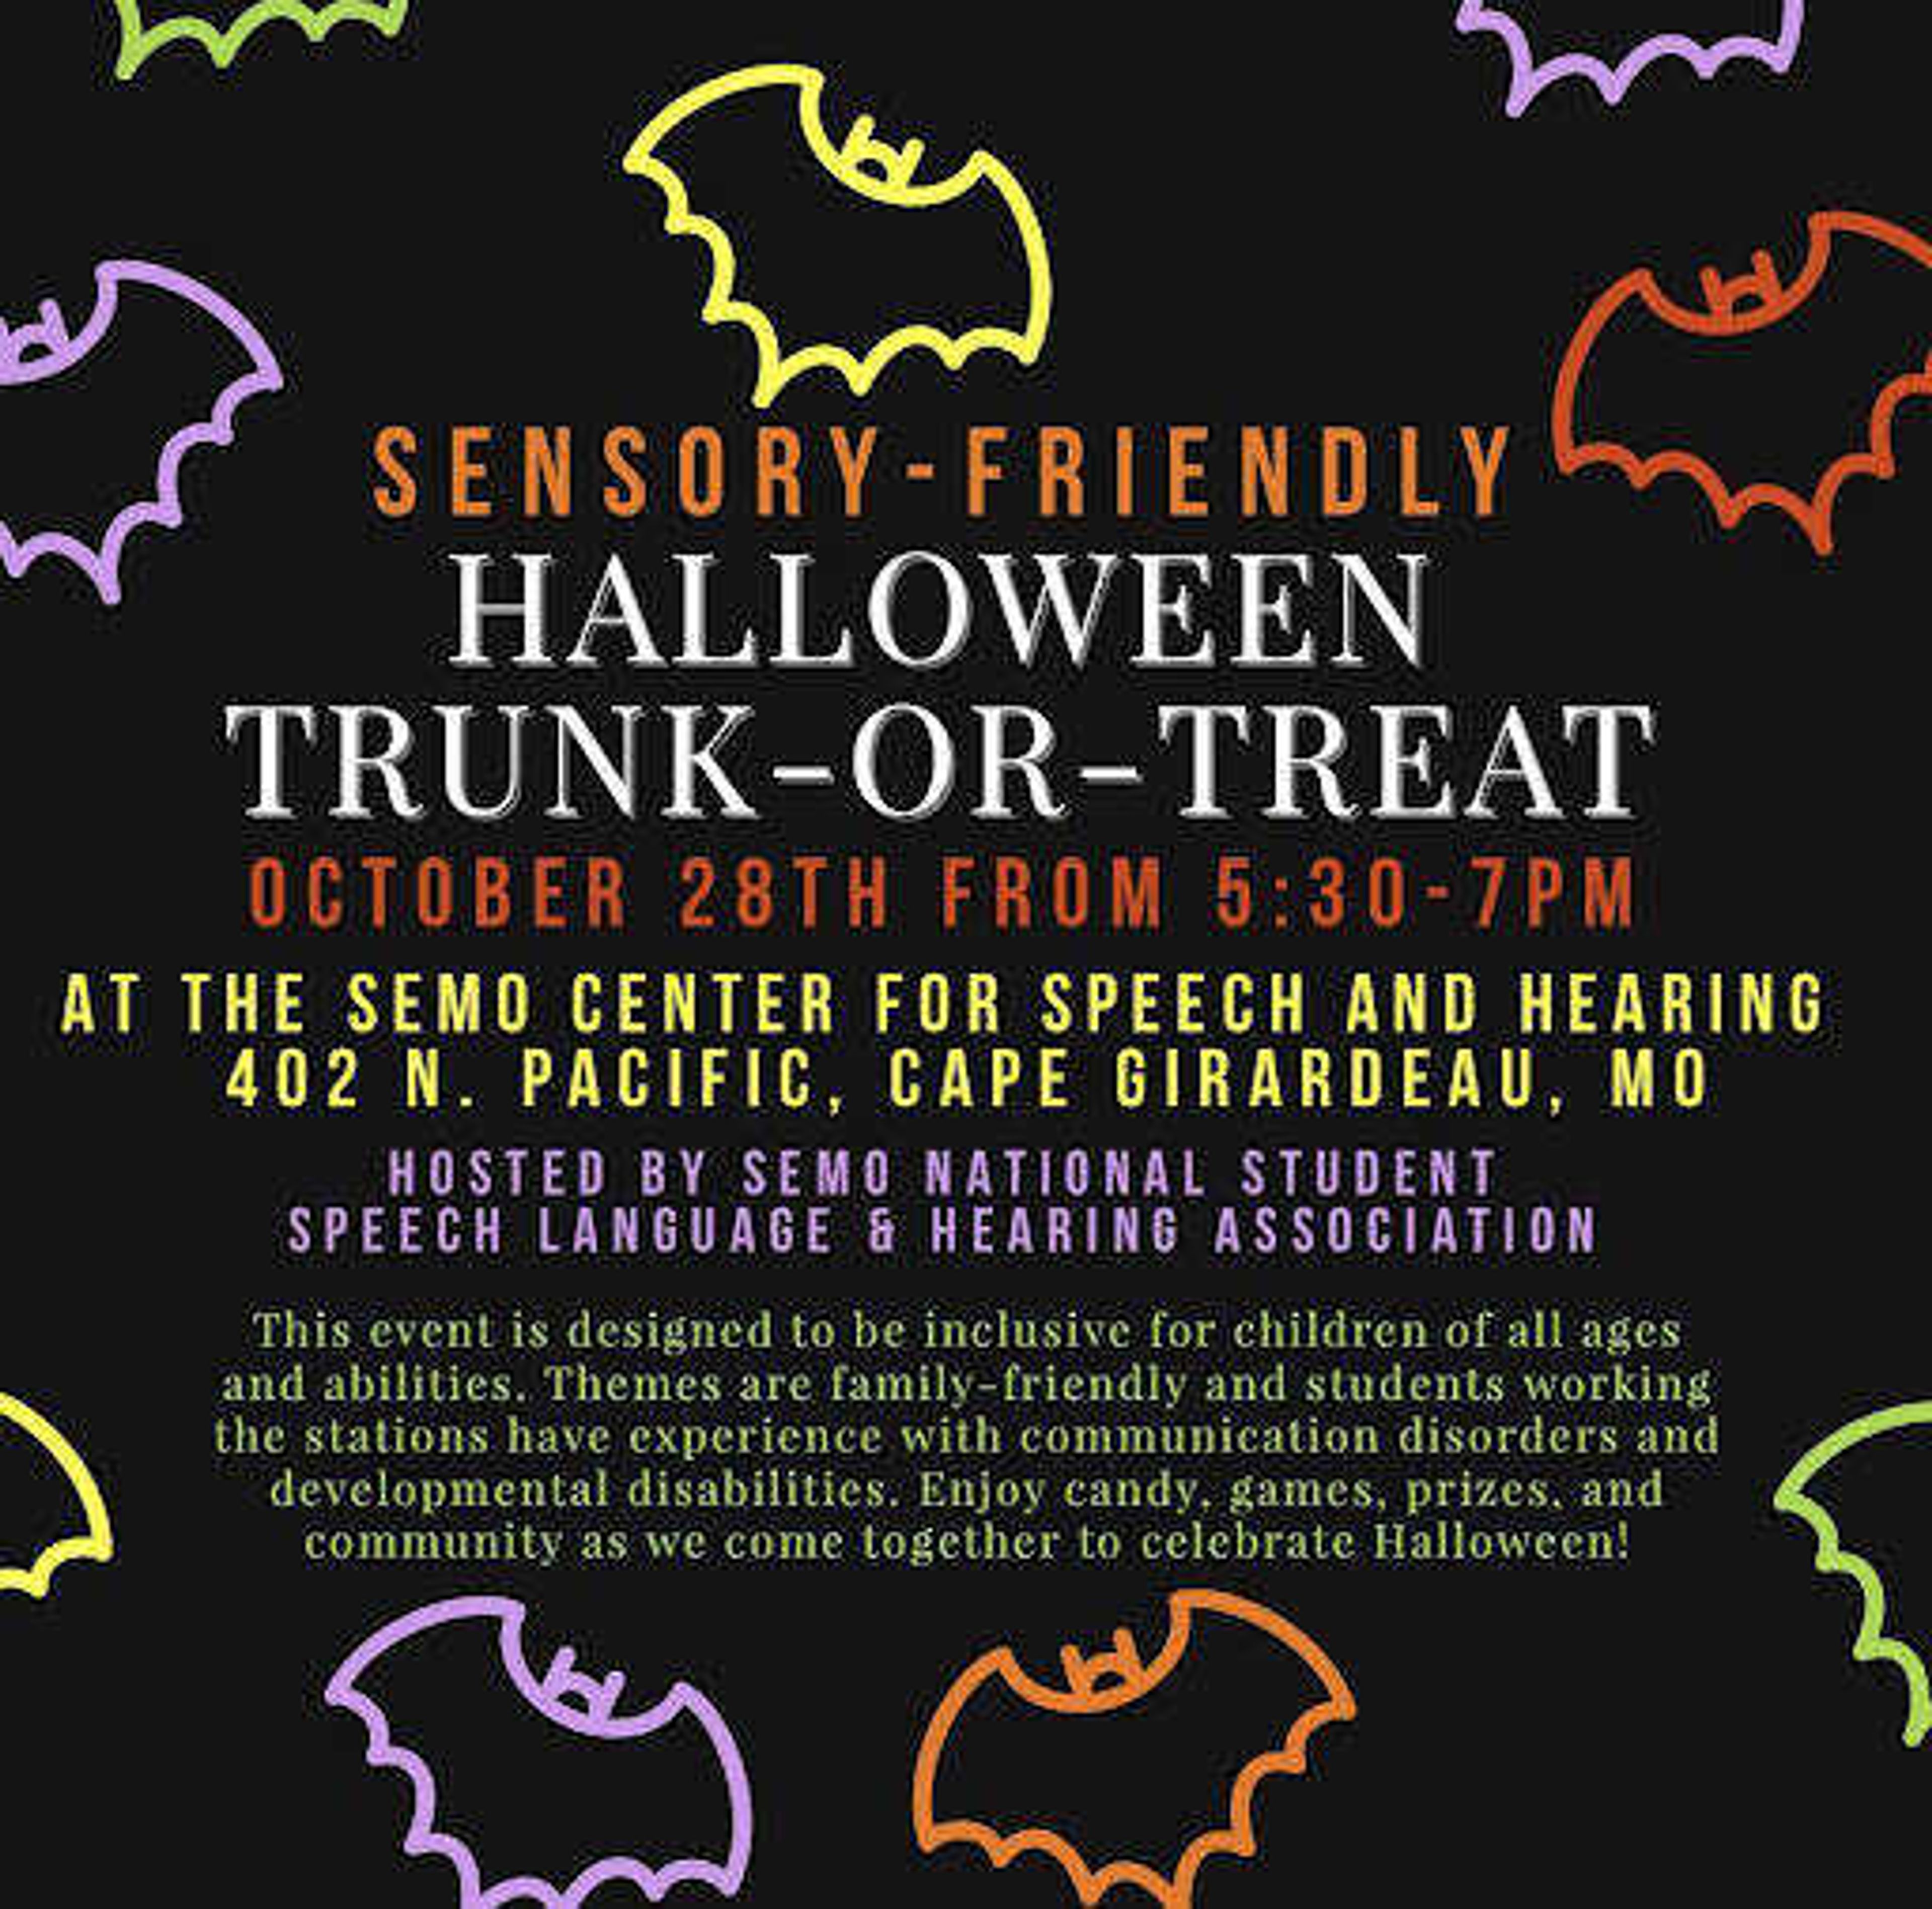 Center for Speech and Hearing hosts third annual sensory-friendly Trunk or Treat